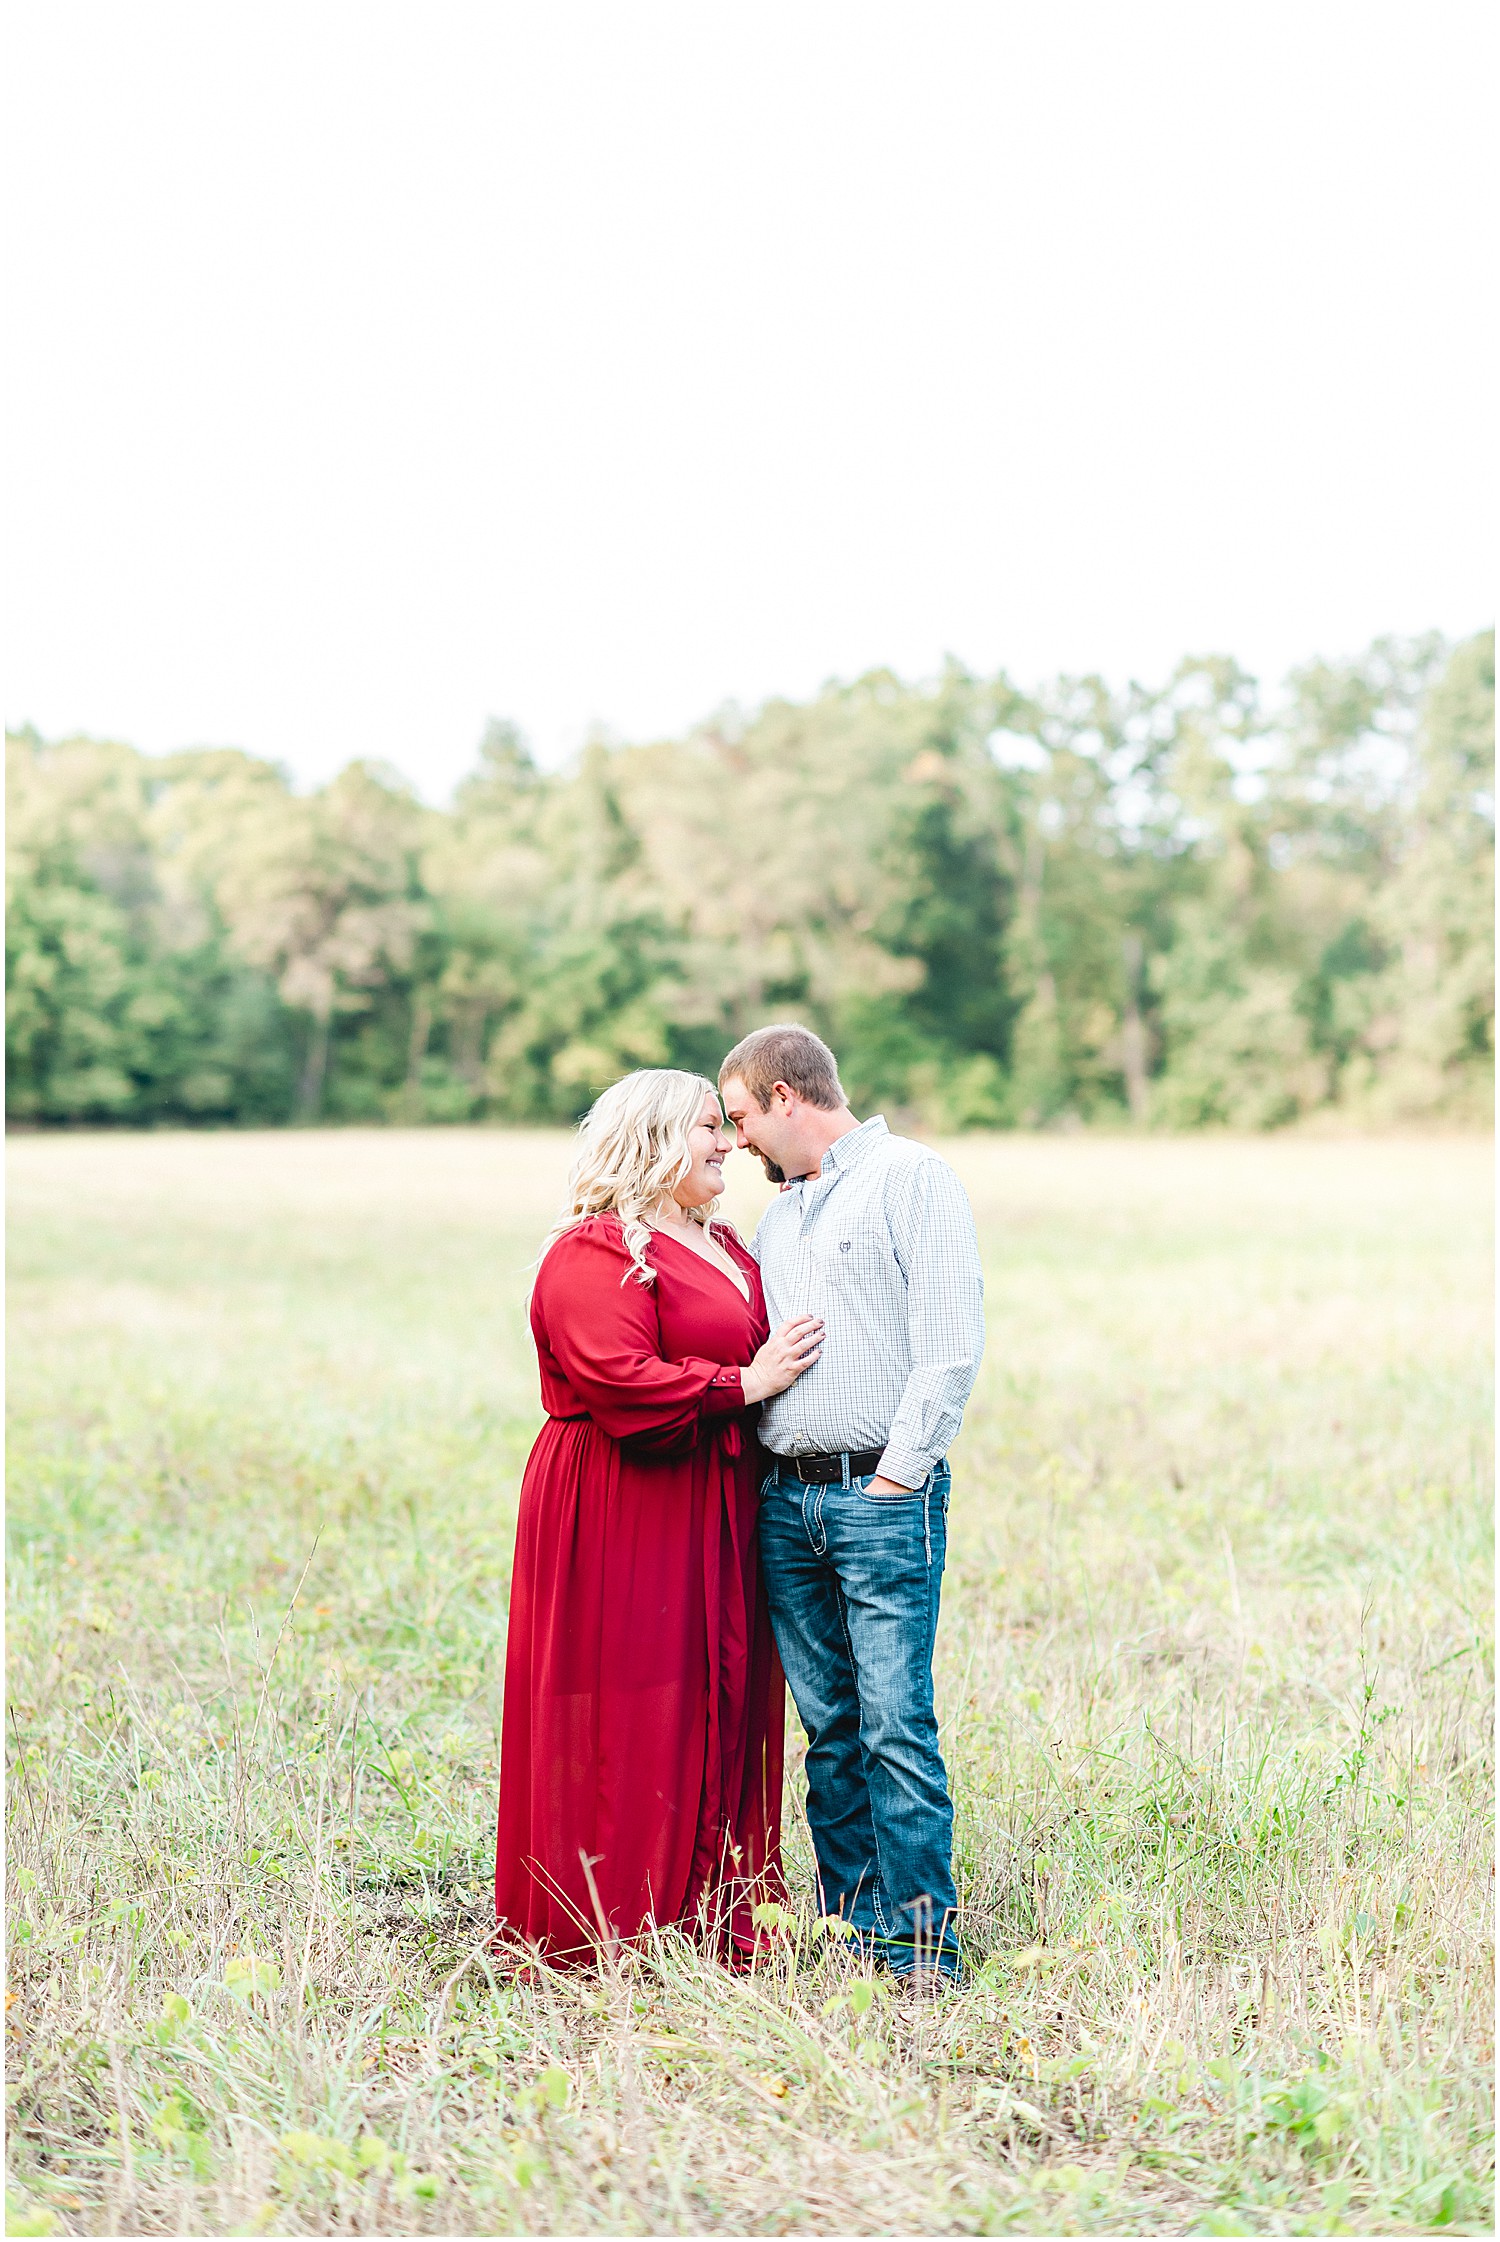 Couple stands in field smiling during engagement session wearing maroon dress.